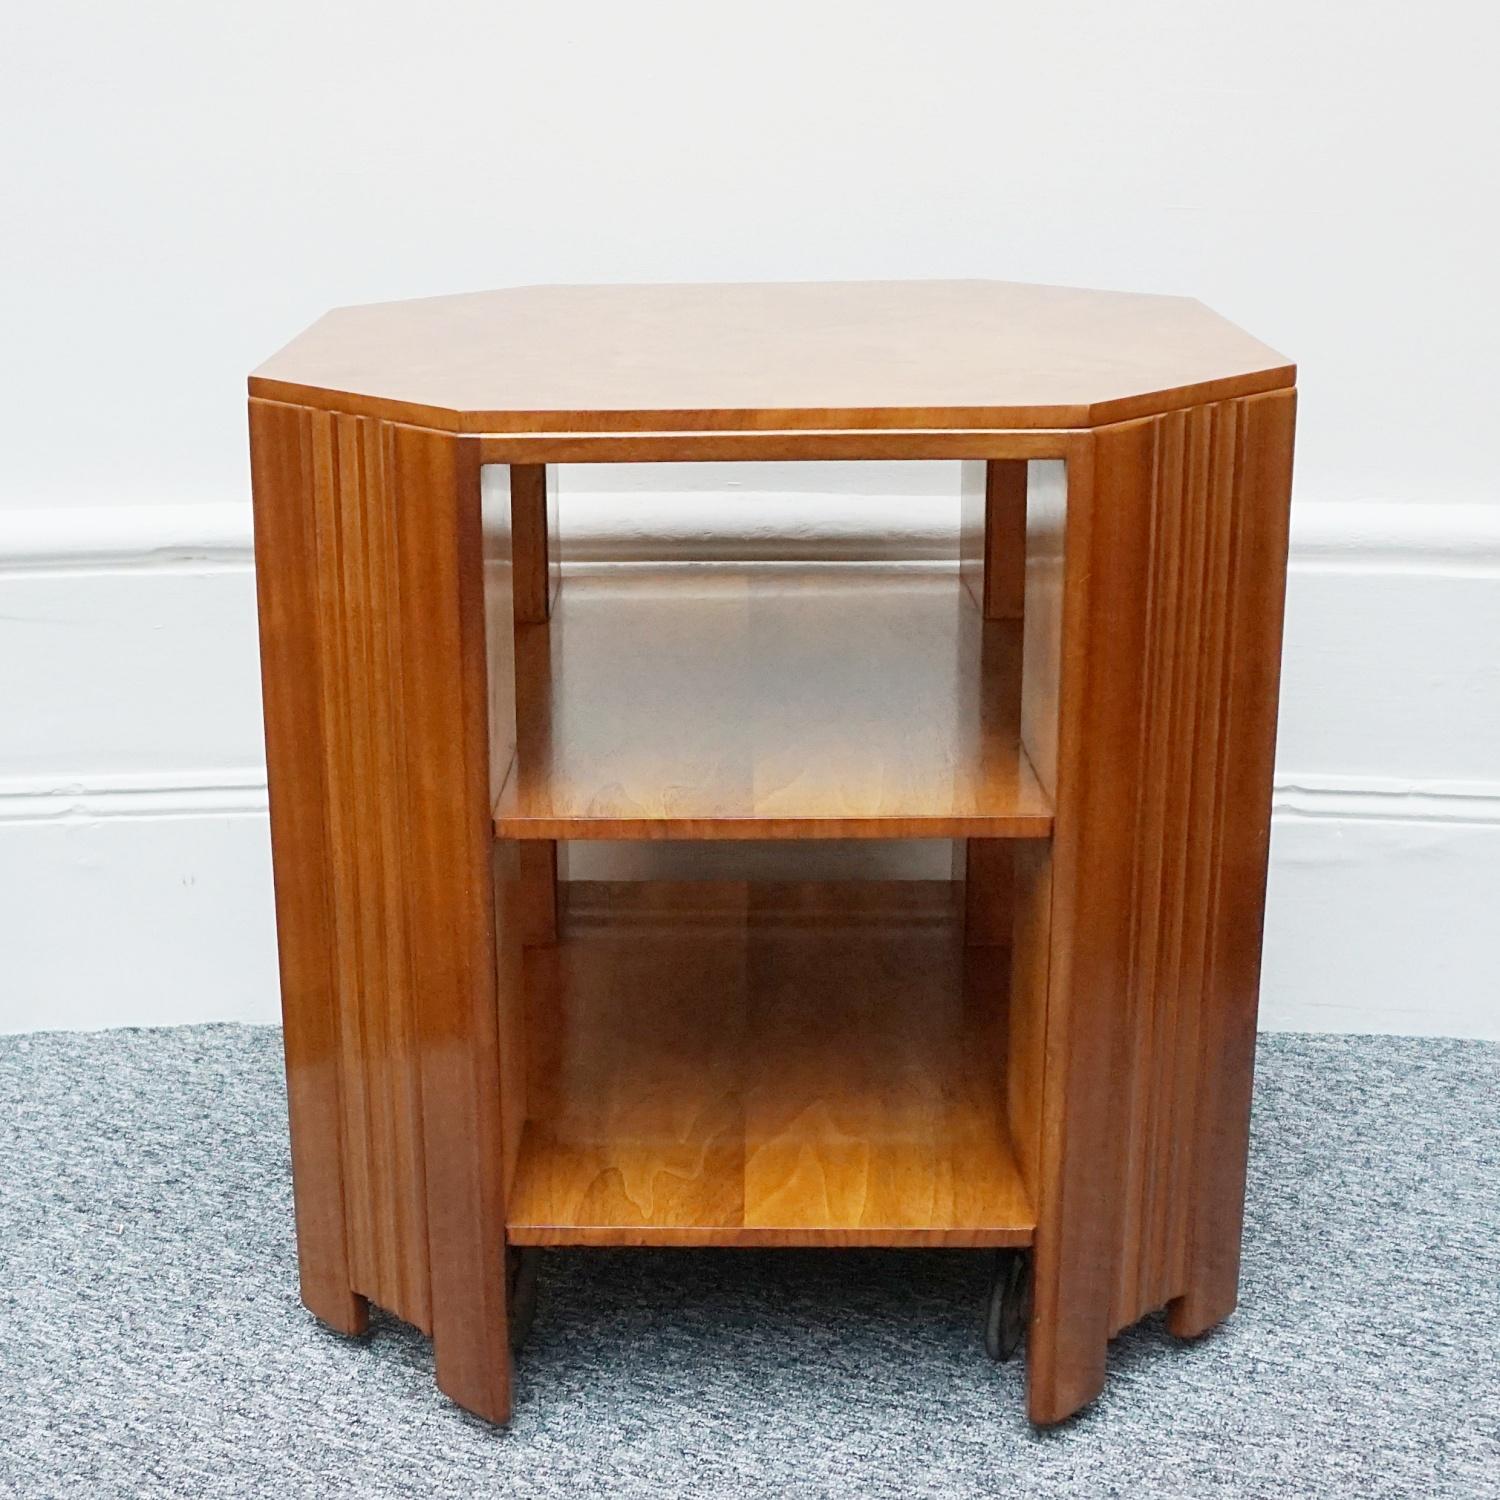 An Art Deco octagonal side table by Waring & Gillow. Walnut veneered with open two tiered shelving. Waring and Gillow Ltd label to underneath 

Origin: English

Date: circa 1935

Item Number: 2103233

All of our furniture is extensively